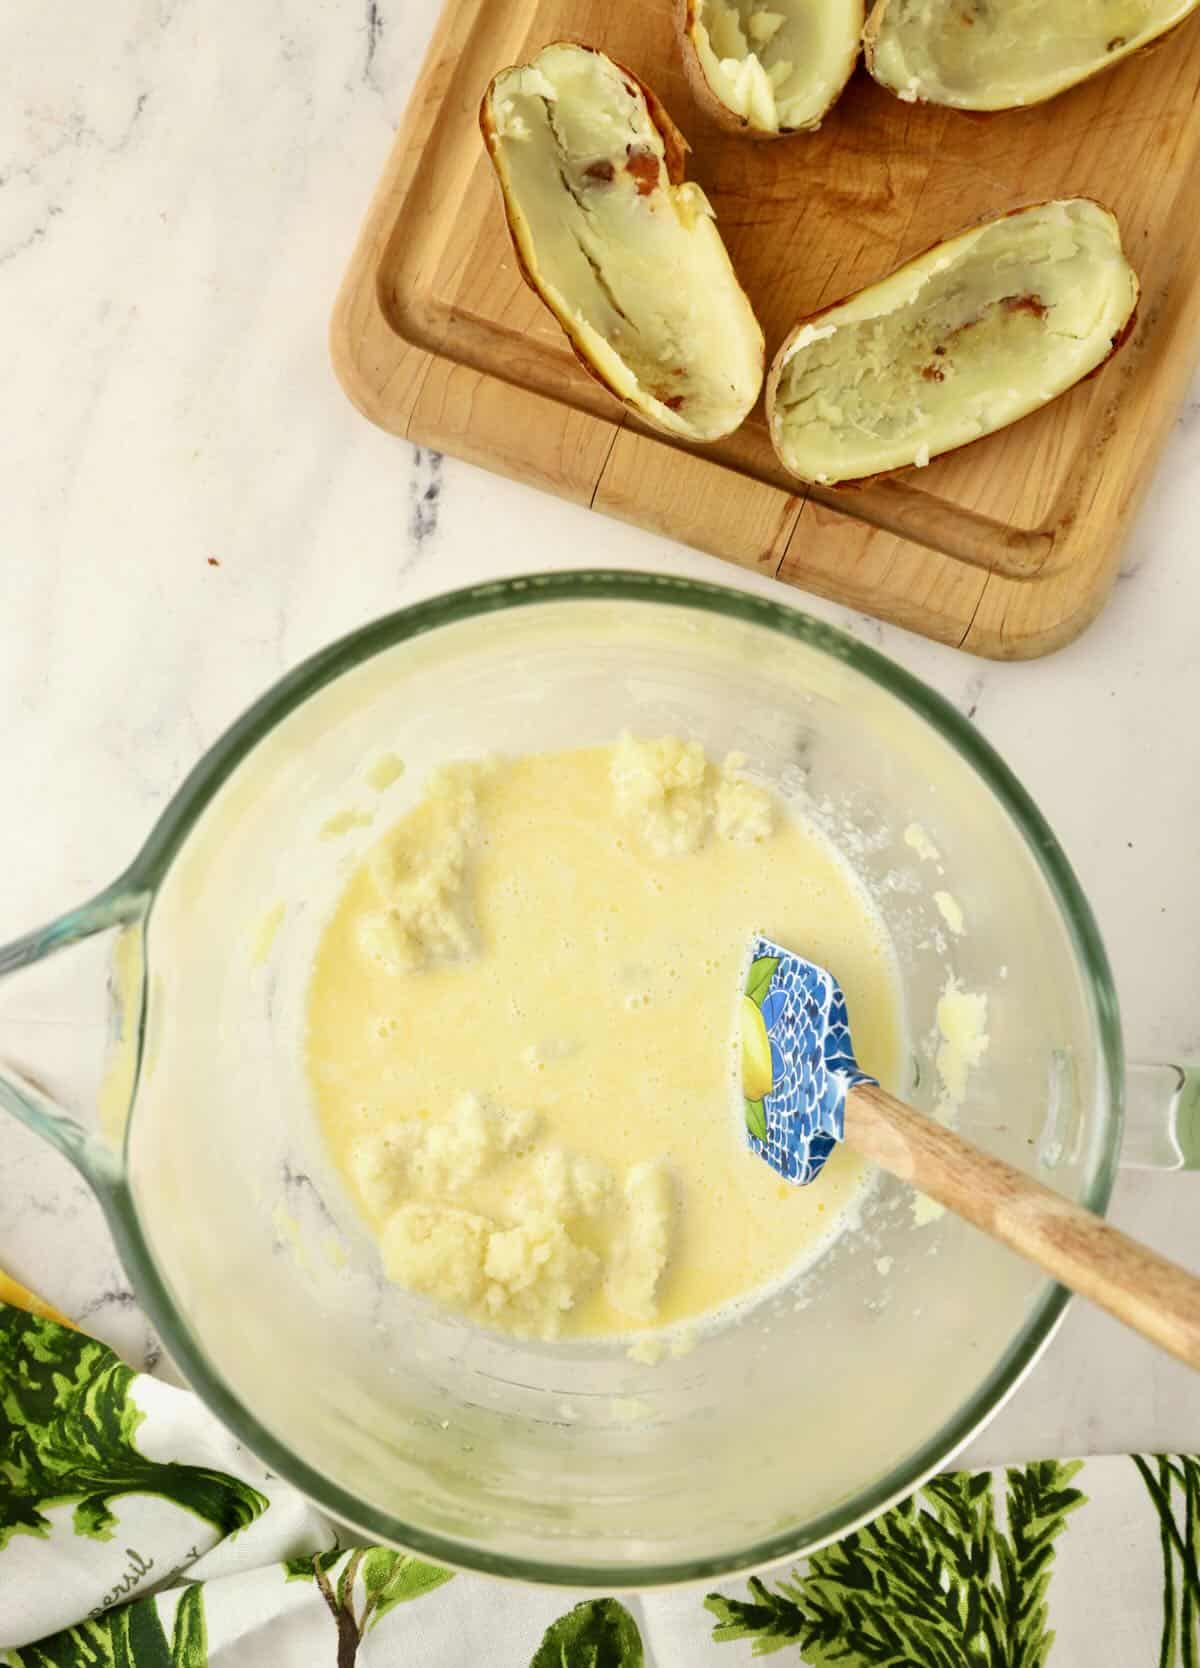 Mashed potatoes in a bowl with cream poured over them.